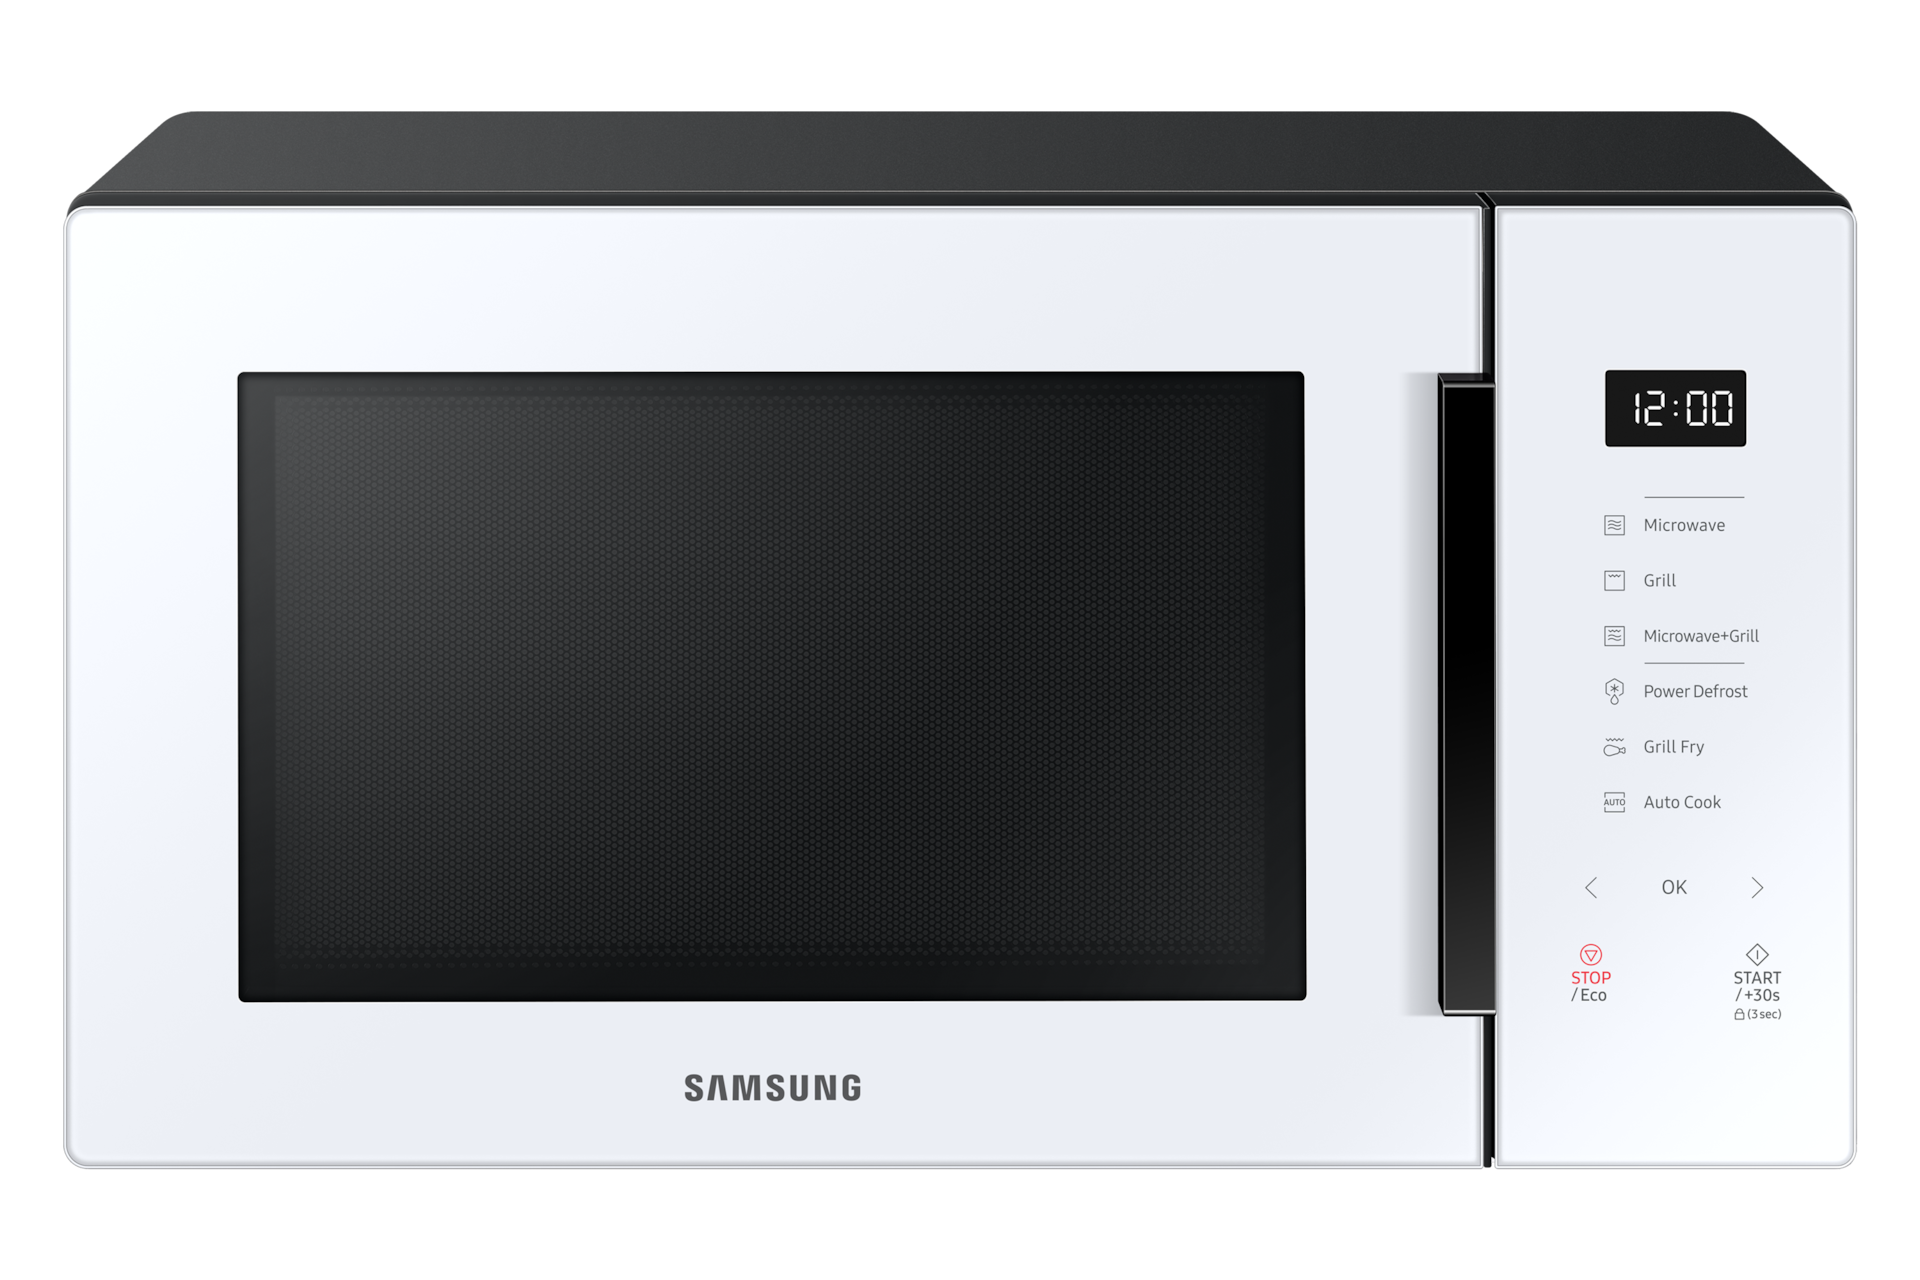 Buy MG30T5018CW/SP now. Image shows Grill Microwave Oven with Grill Fry, 30L (White)